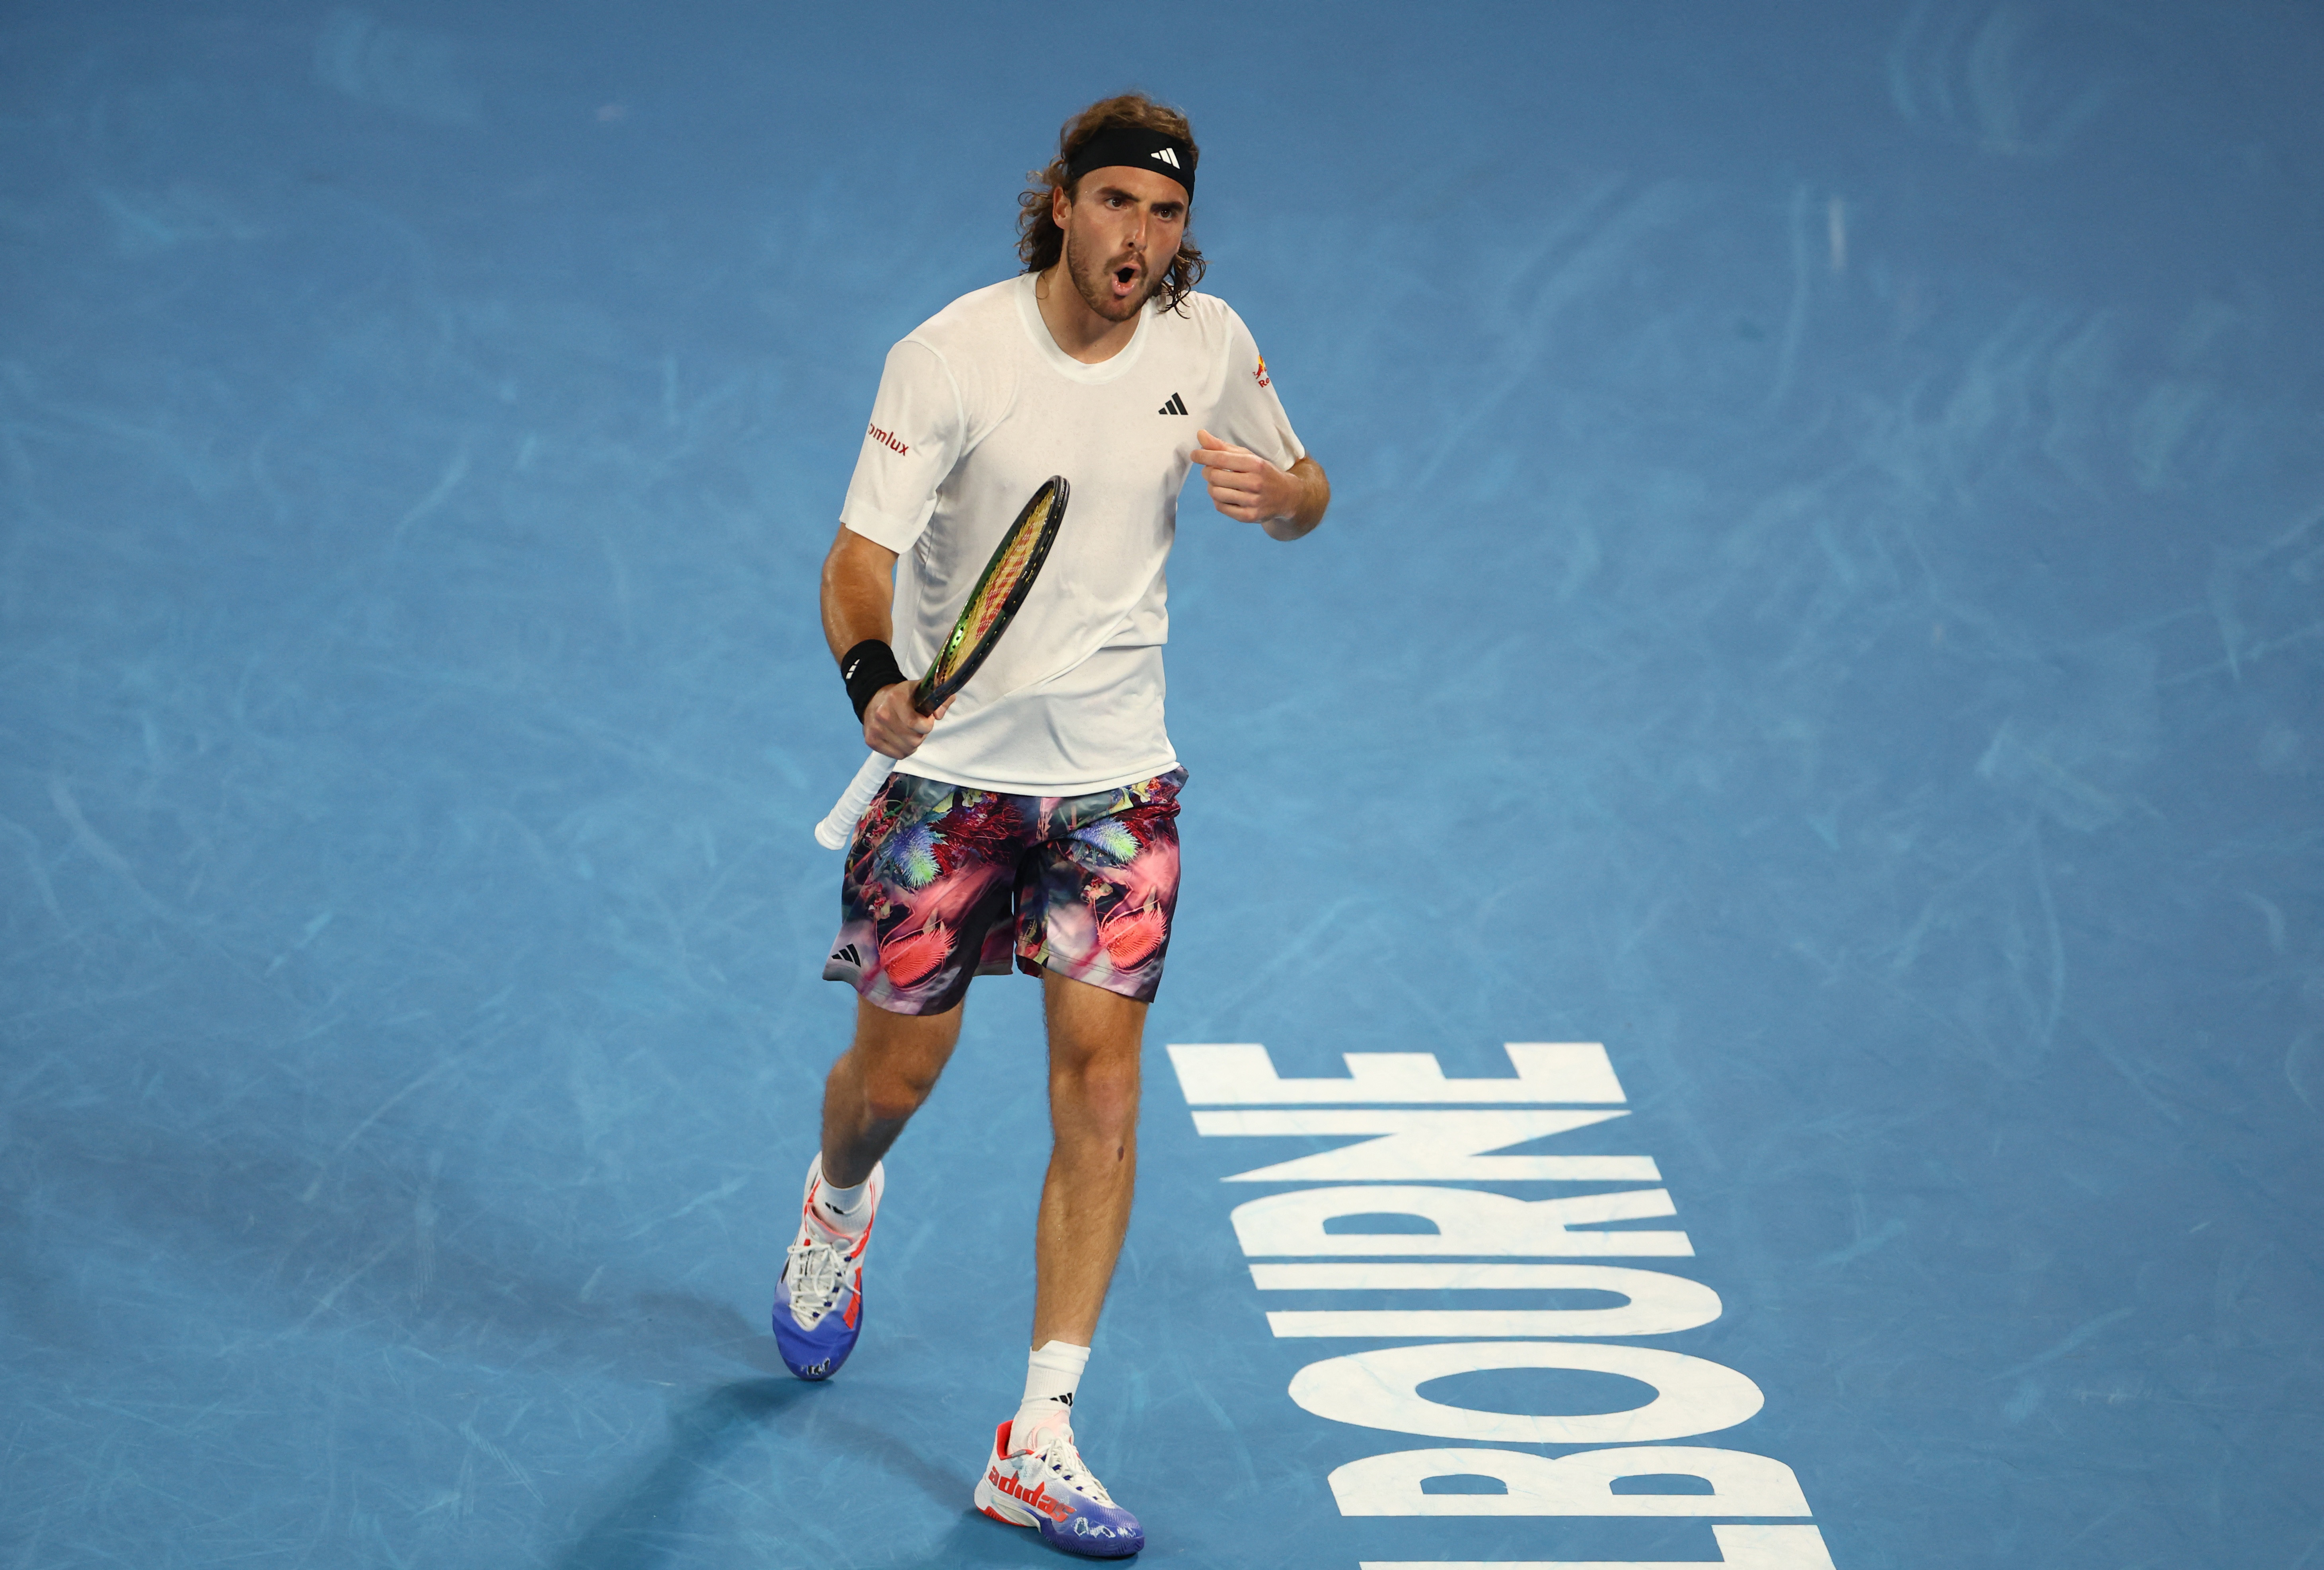 Tsitsipas to play twice in Rotterdam on Friday. After Khachanov he